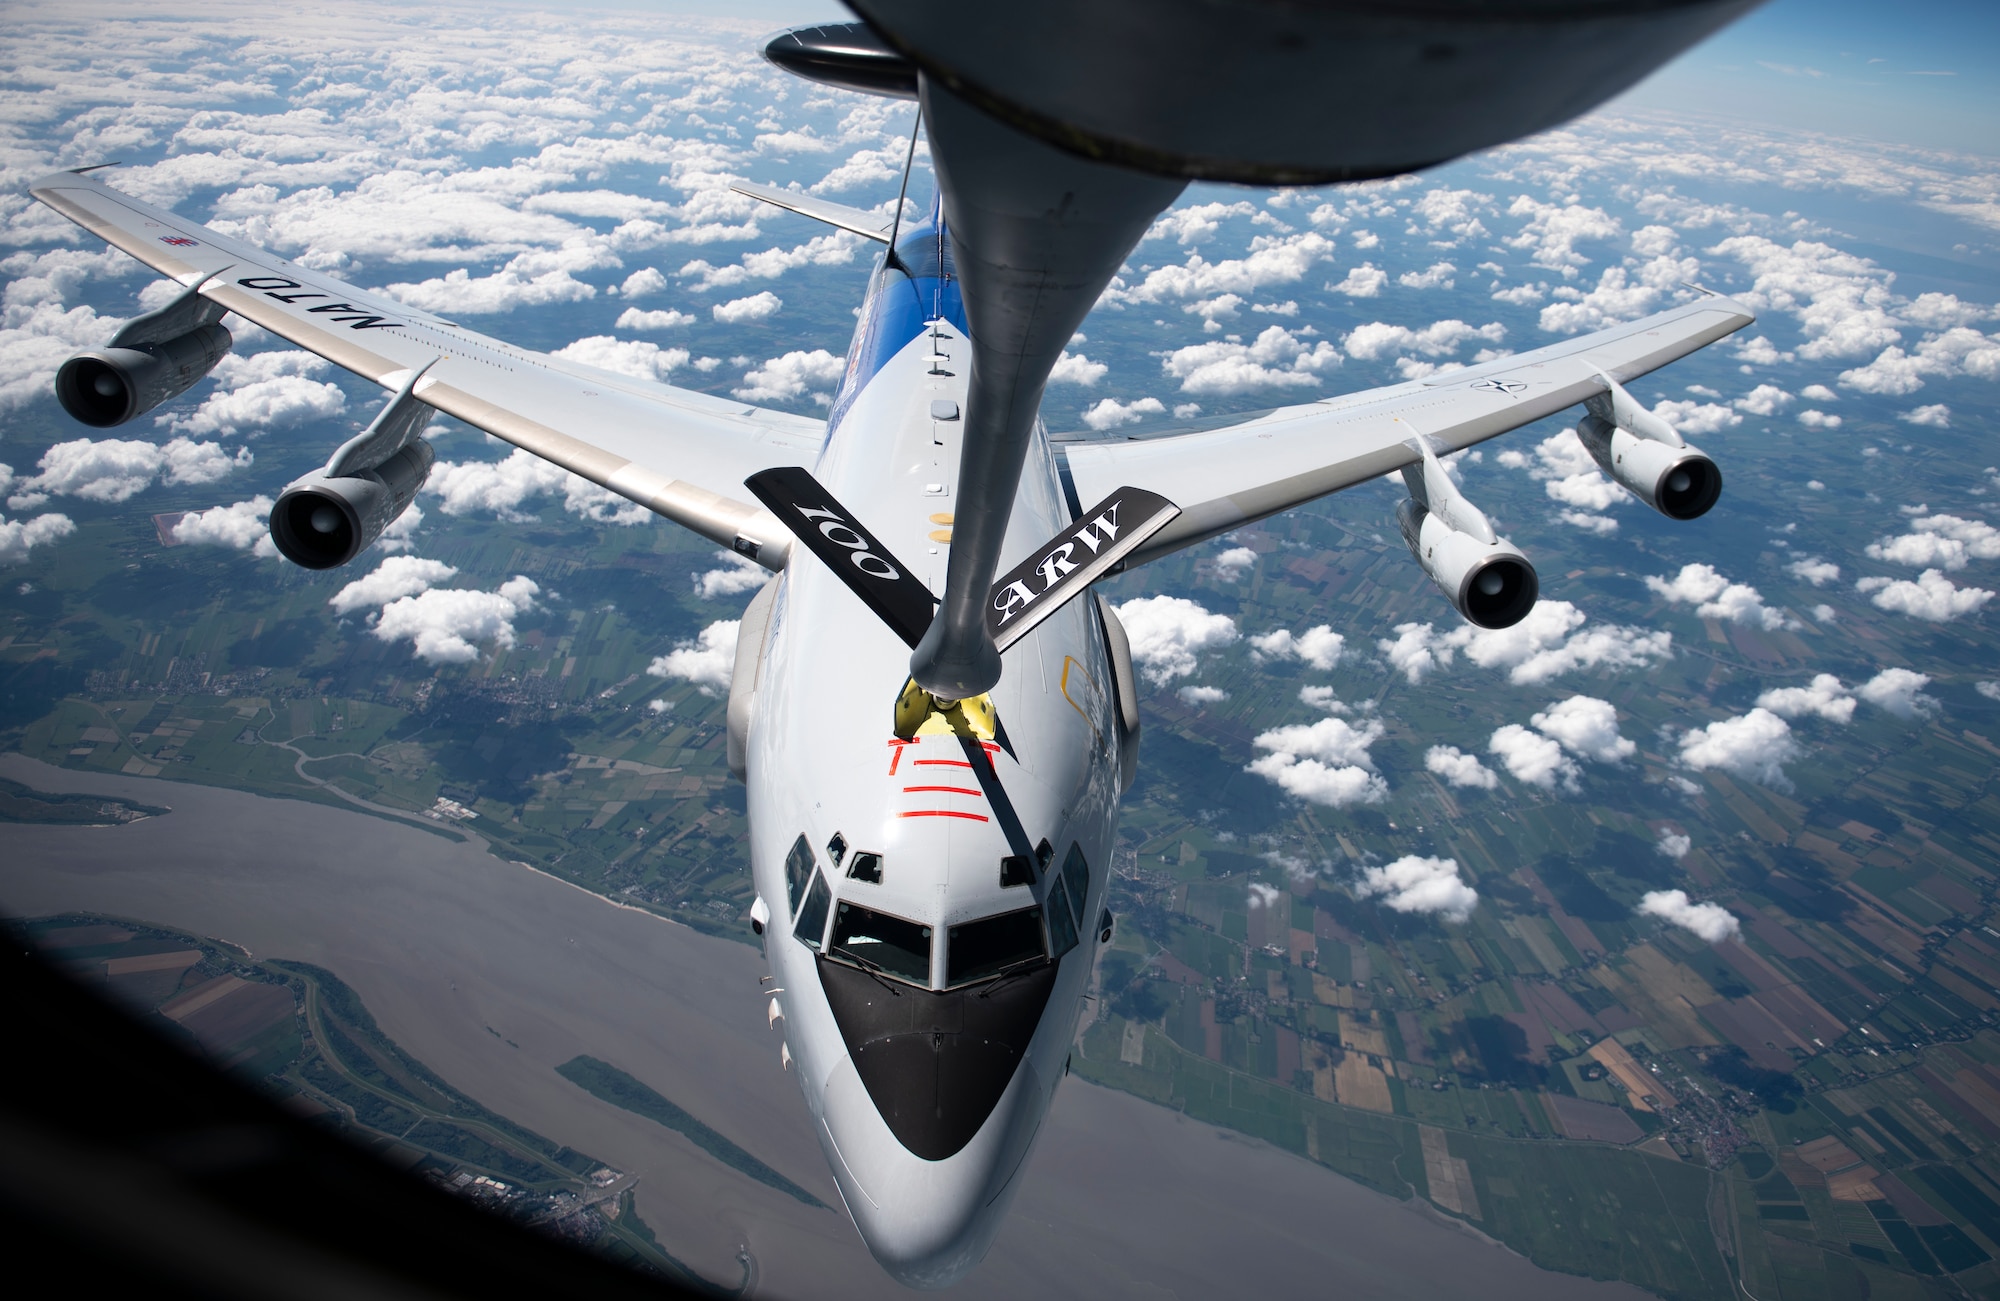 A NATO E-3 Sentry from Geilenkirchen NATO Air Base receives fuel from a U.S. Air Force KC-135 Stratotanker assigned to the 100th Air Refueling Wing, RAF Mildenhall, England, over Germany, July 17, 2020. The 100th ARW is the only permanent U.S. air refueling wing in the European theater, providing the critical air refueling "bridge" which allows the Expeditionary Air Force to deploy around the globe at a moment's notice. (U.S. Air Force photo by Tech. Sgt. Emerson Nuñez)